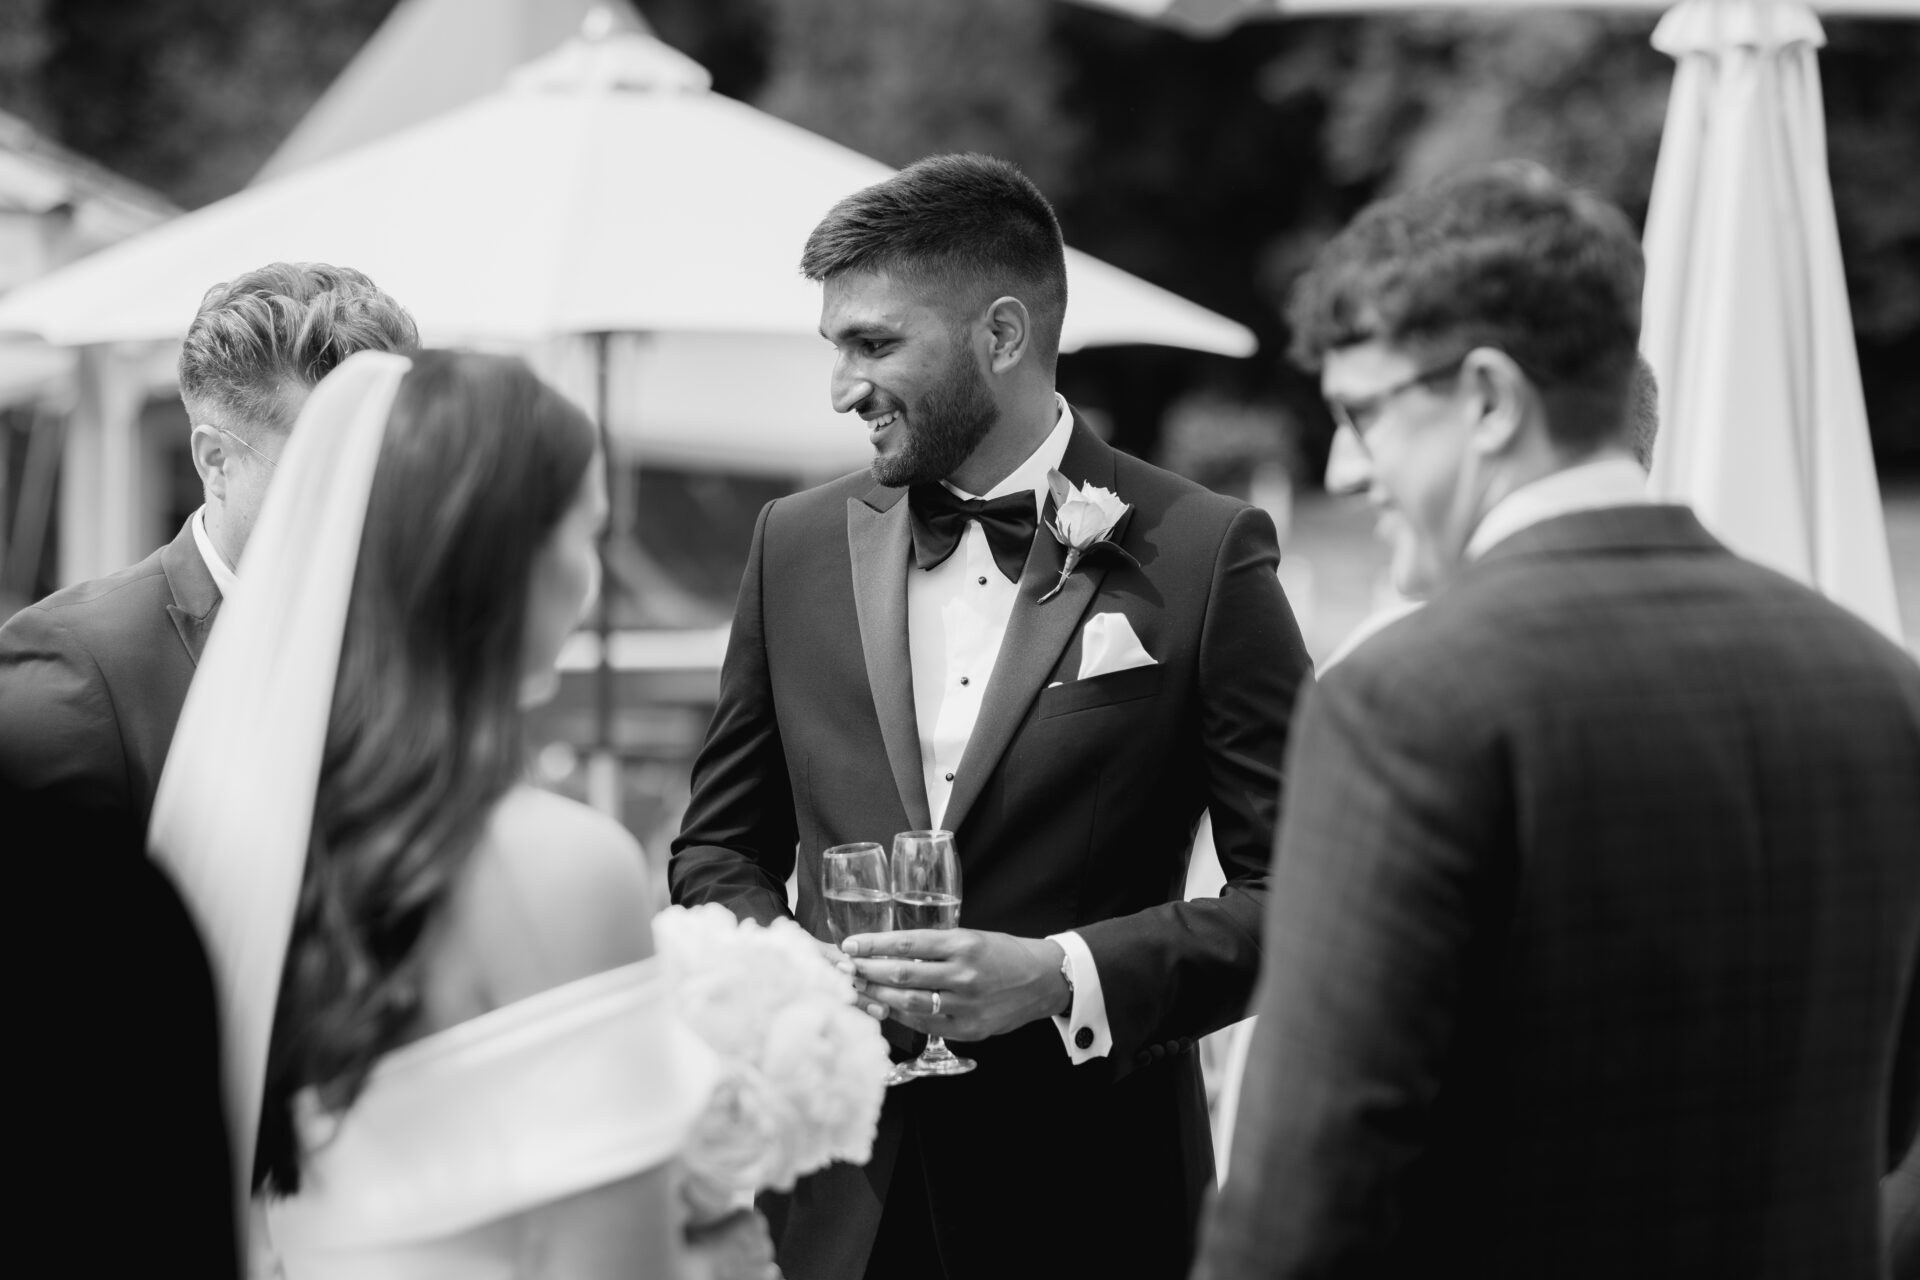 The groom talks with wedding guests at Tortworth Court